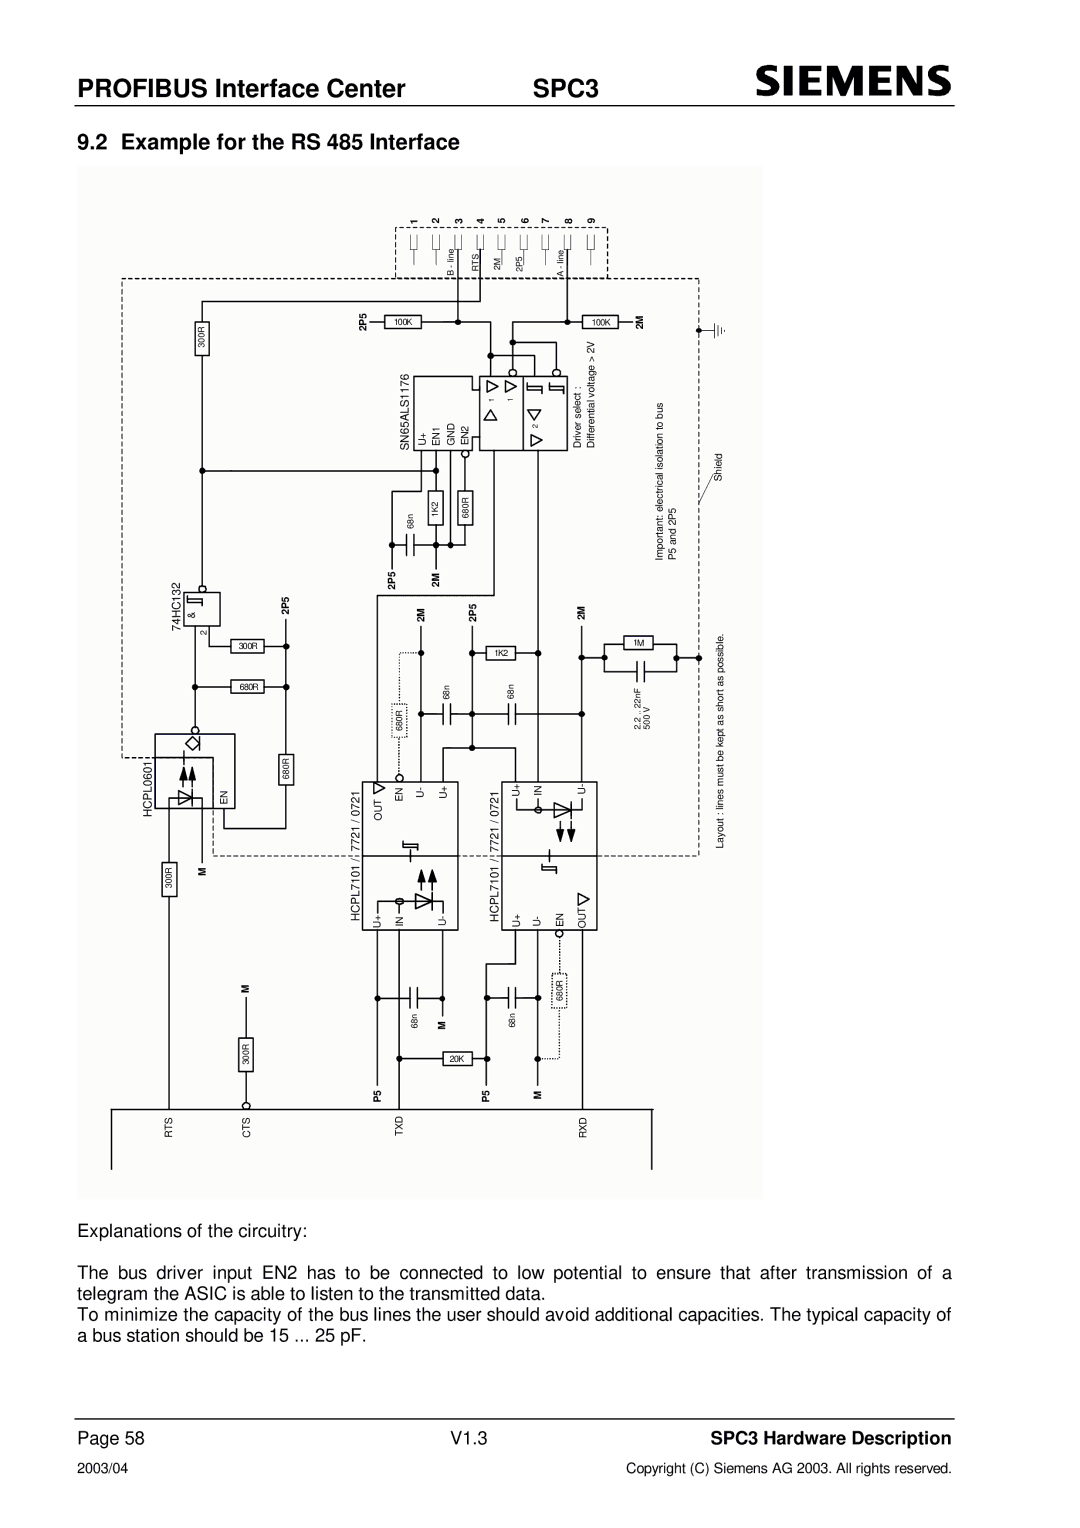 Siemens SPC3 manual Example for the RS 485 Interface, SN65ALS1176 